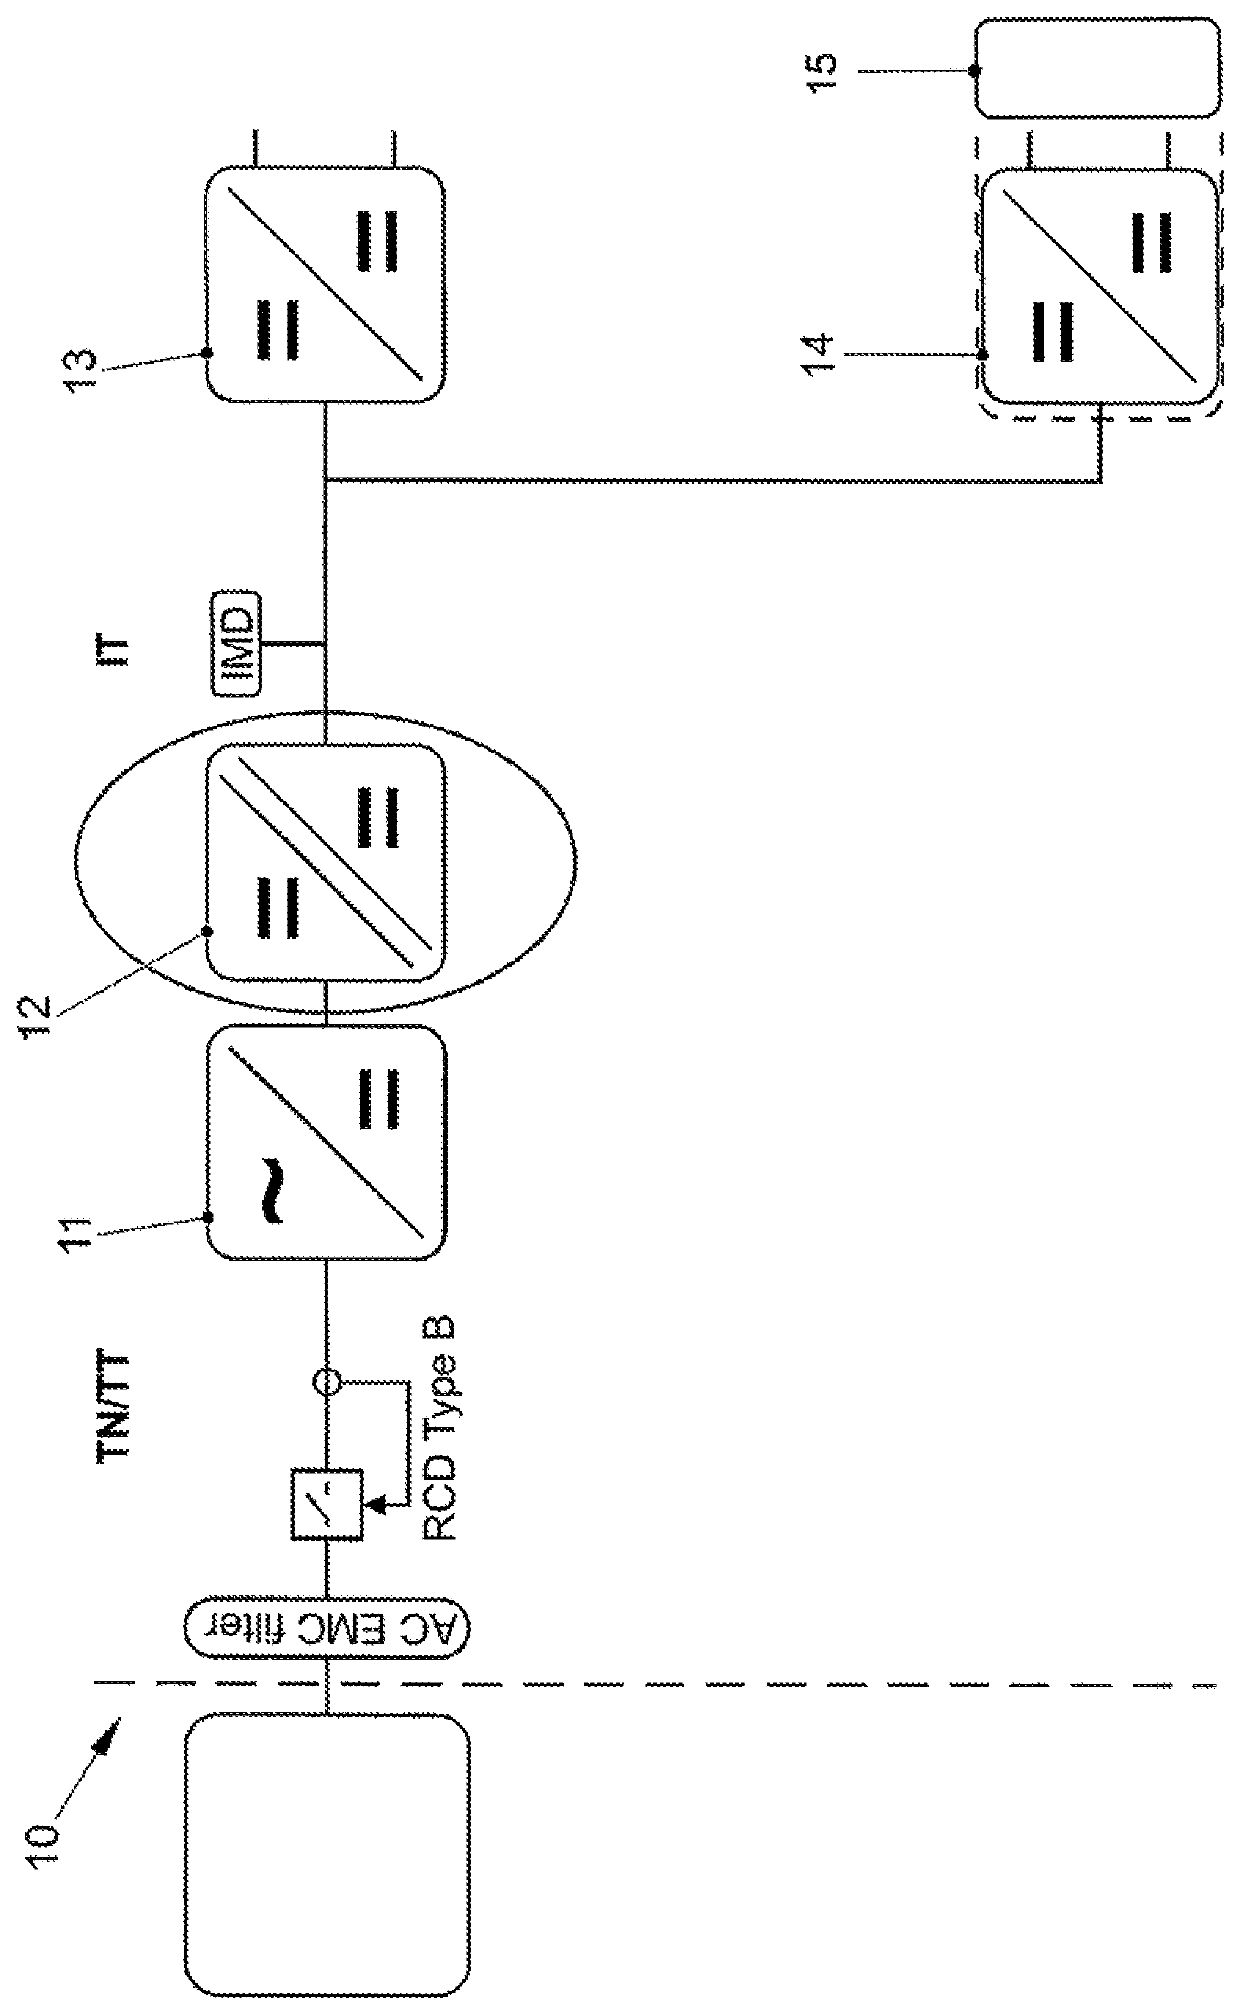 Galvanic isolation in the power electronics system in a charging station or electricity charging station